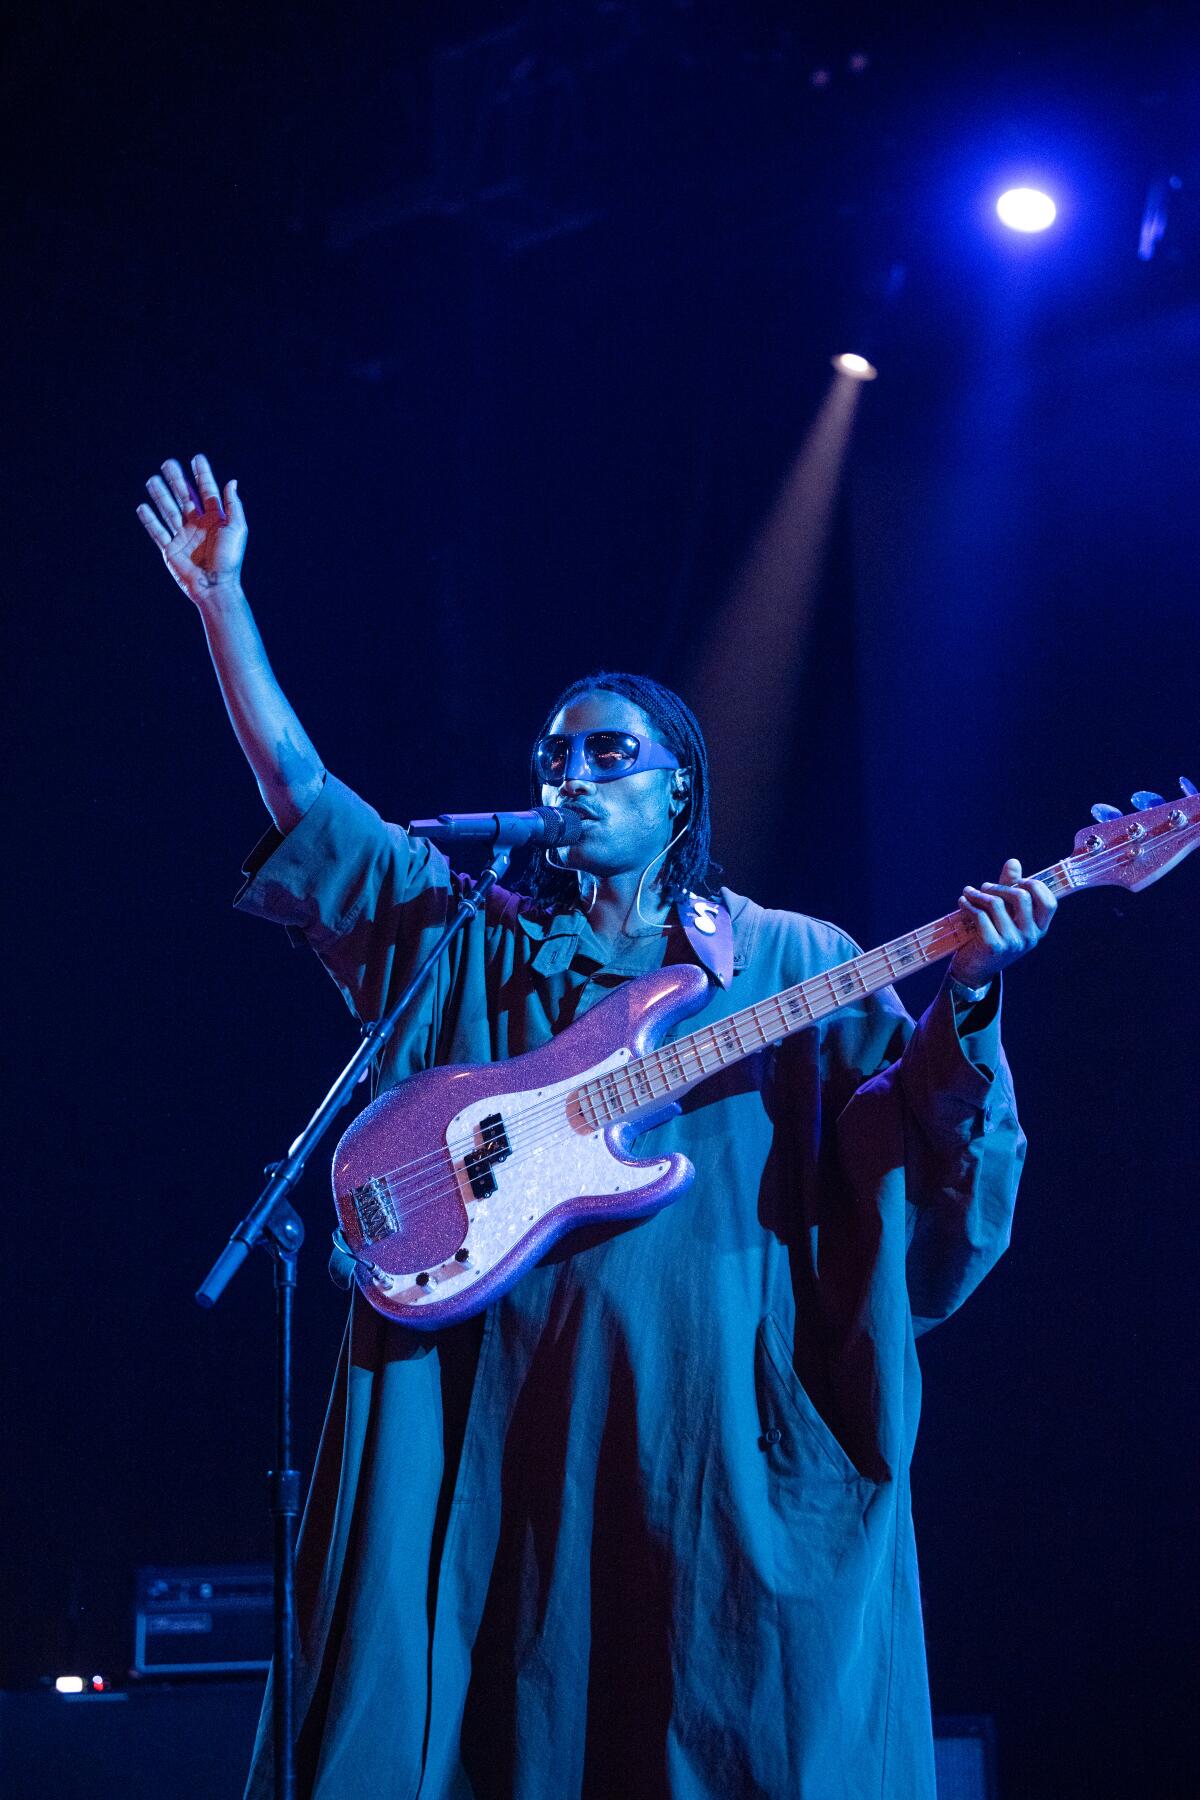 A musician in a long robe performs onstage with an electric guitar